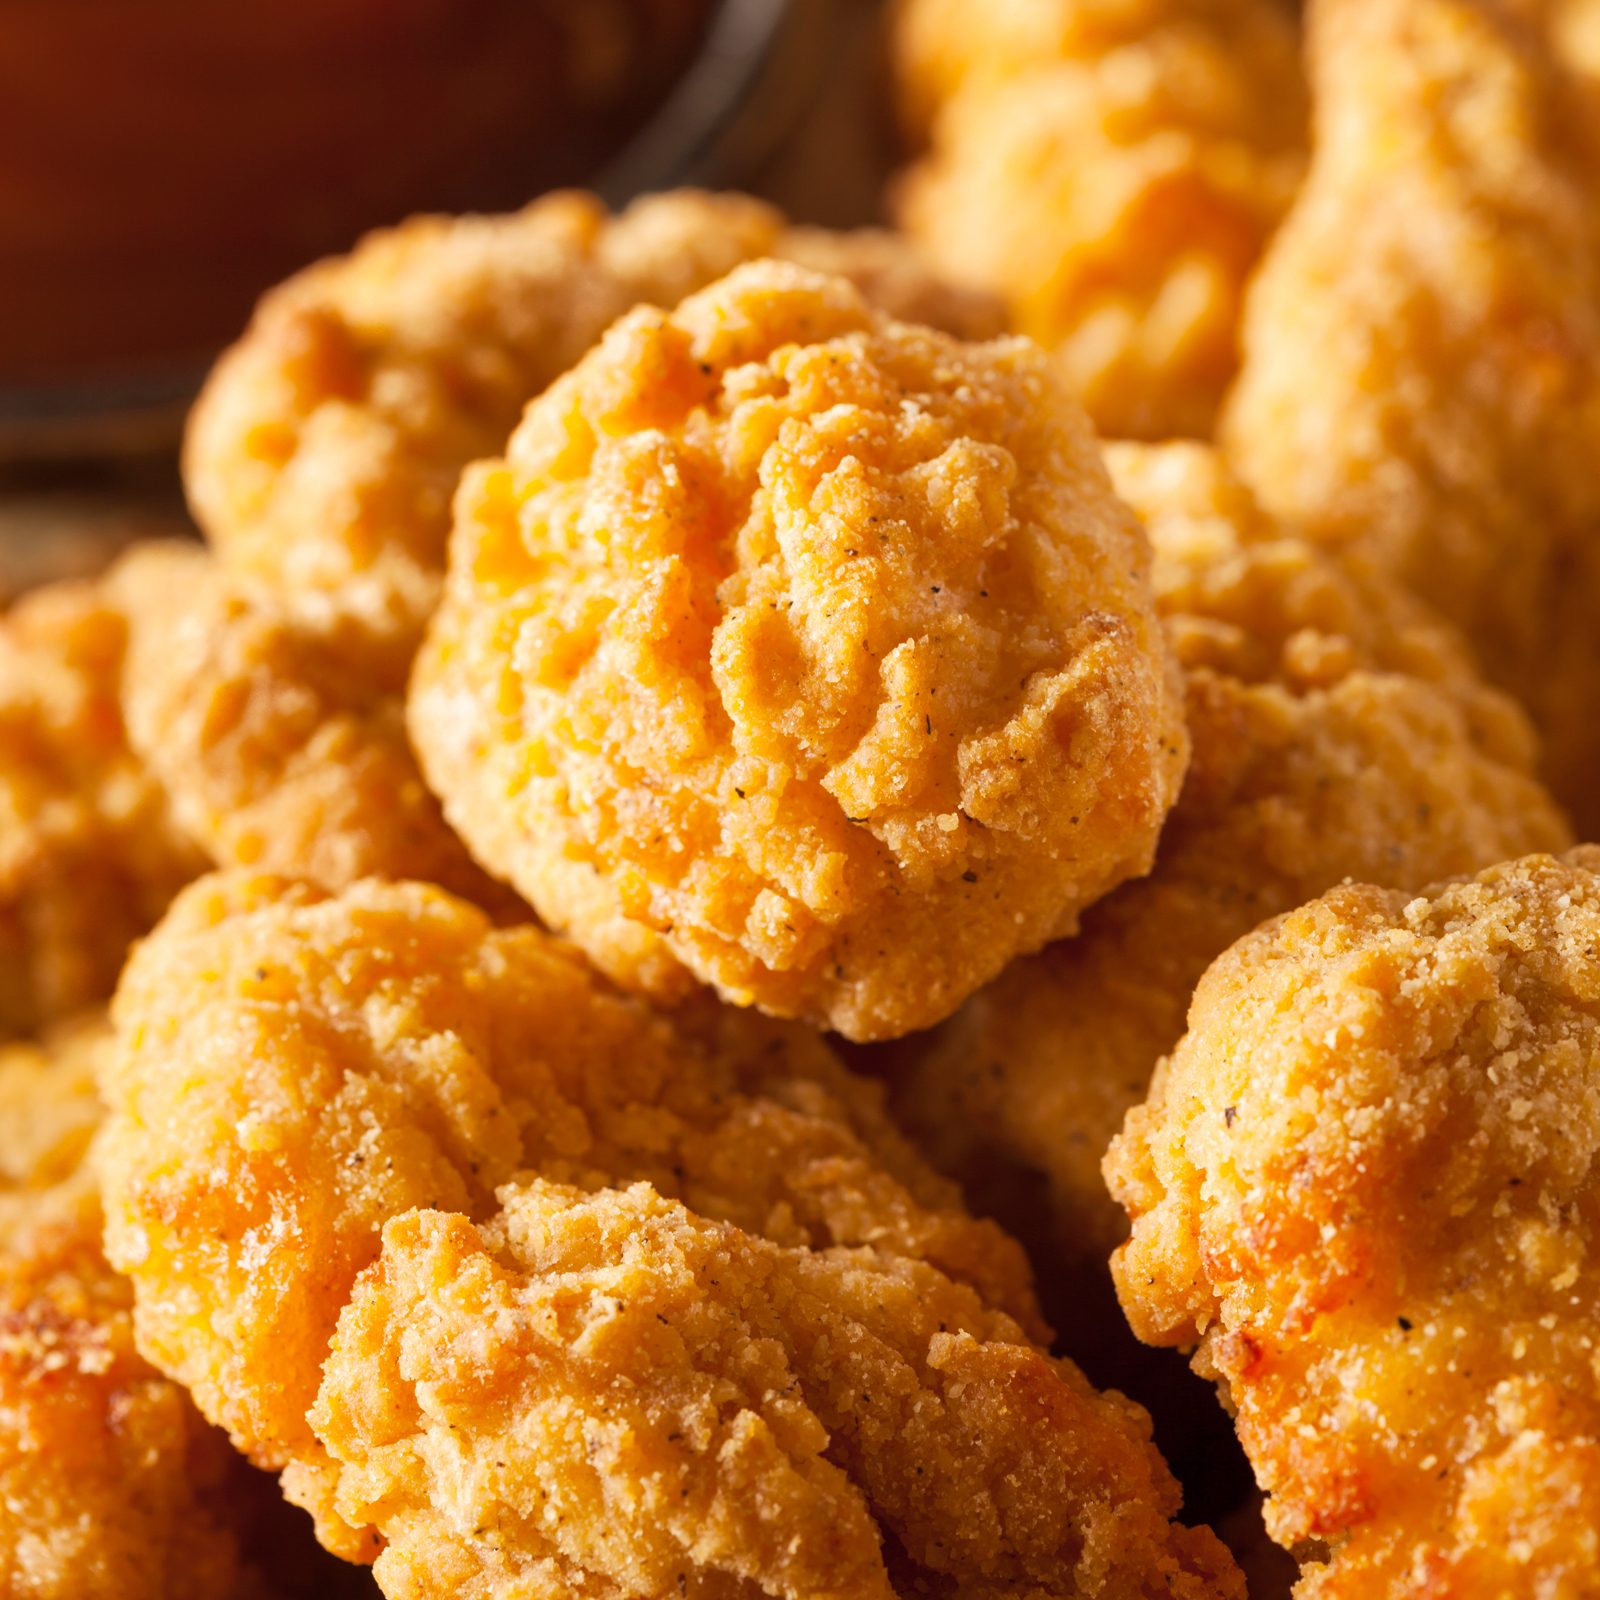 Tyson Recalls 30,000 Pounds of Chicken Nuggets Due to Dangerous Find